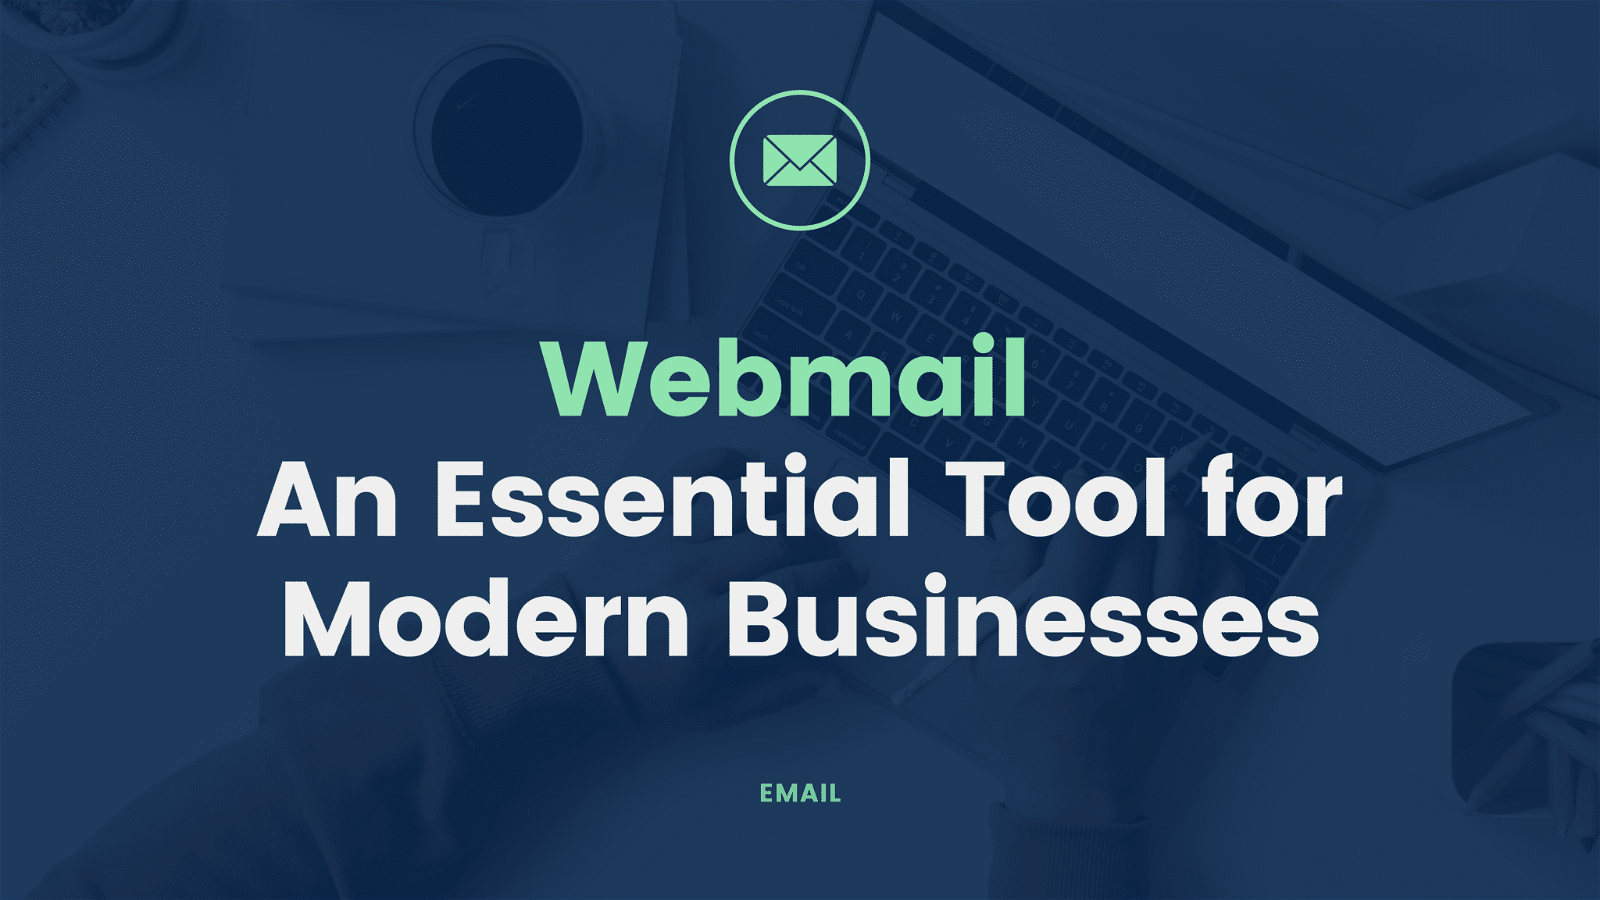 This image is showing how webmail is an essential tool for modern businesses to stay connected and communicate.